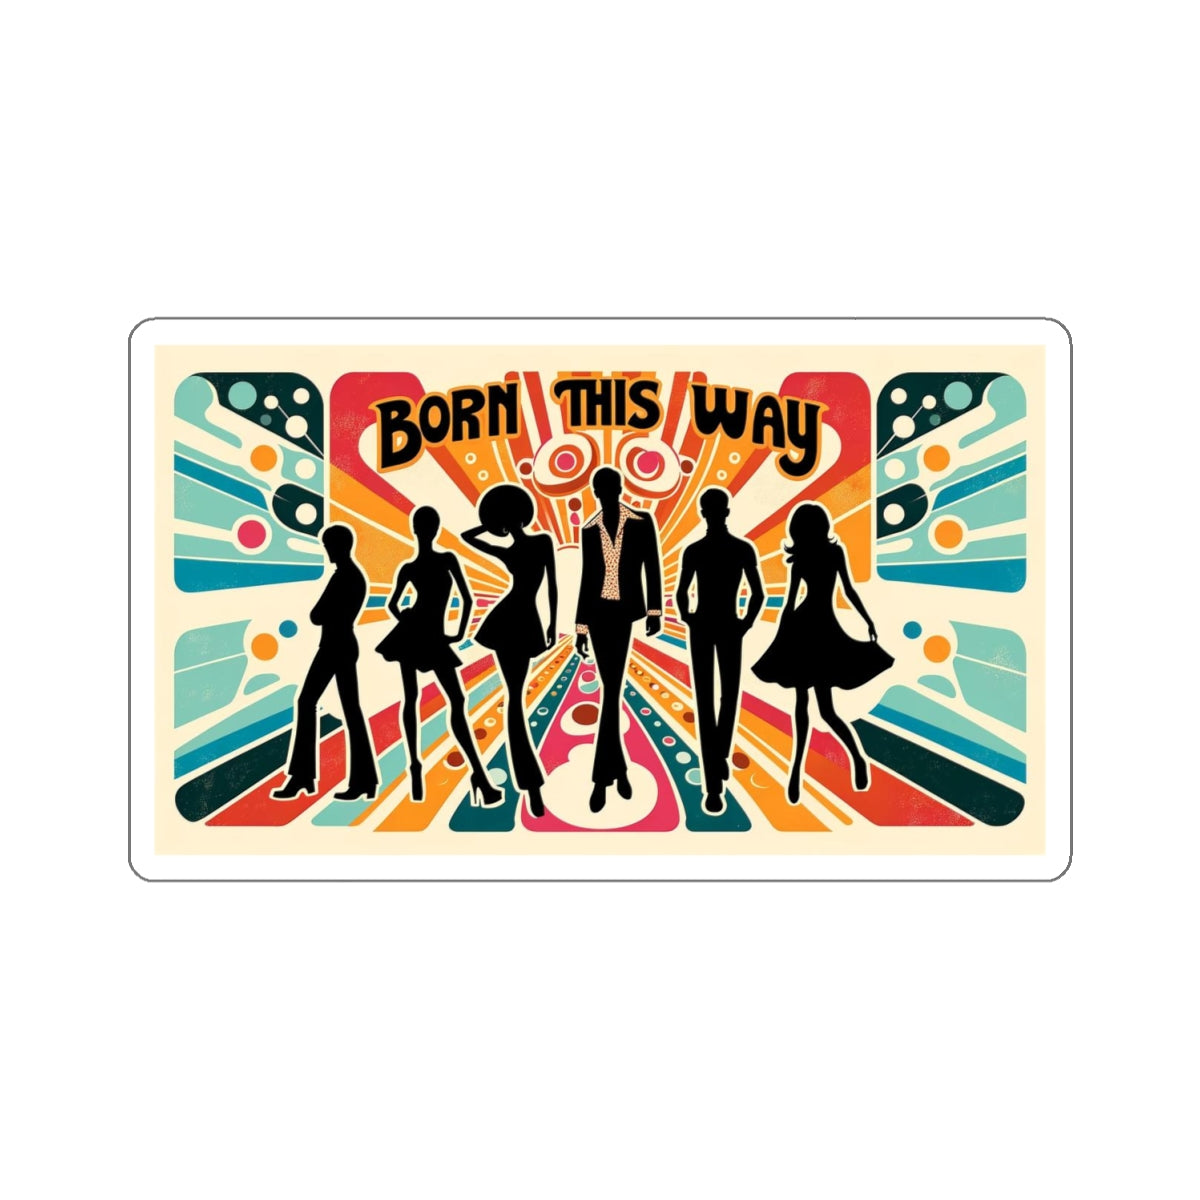 Born This Way! Inspirational Caring Statement vinyl Sticker: for laptop, kindle, phone, ipad, instrument case, notebook, or water bottle